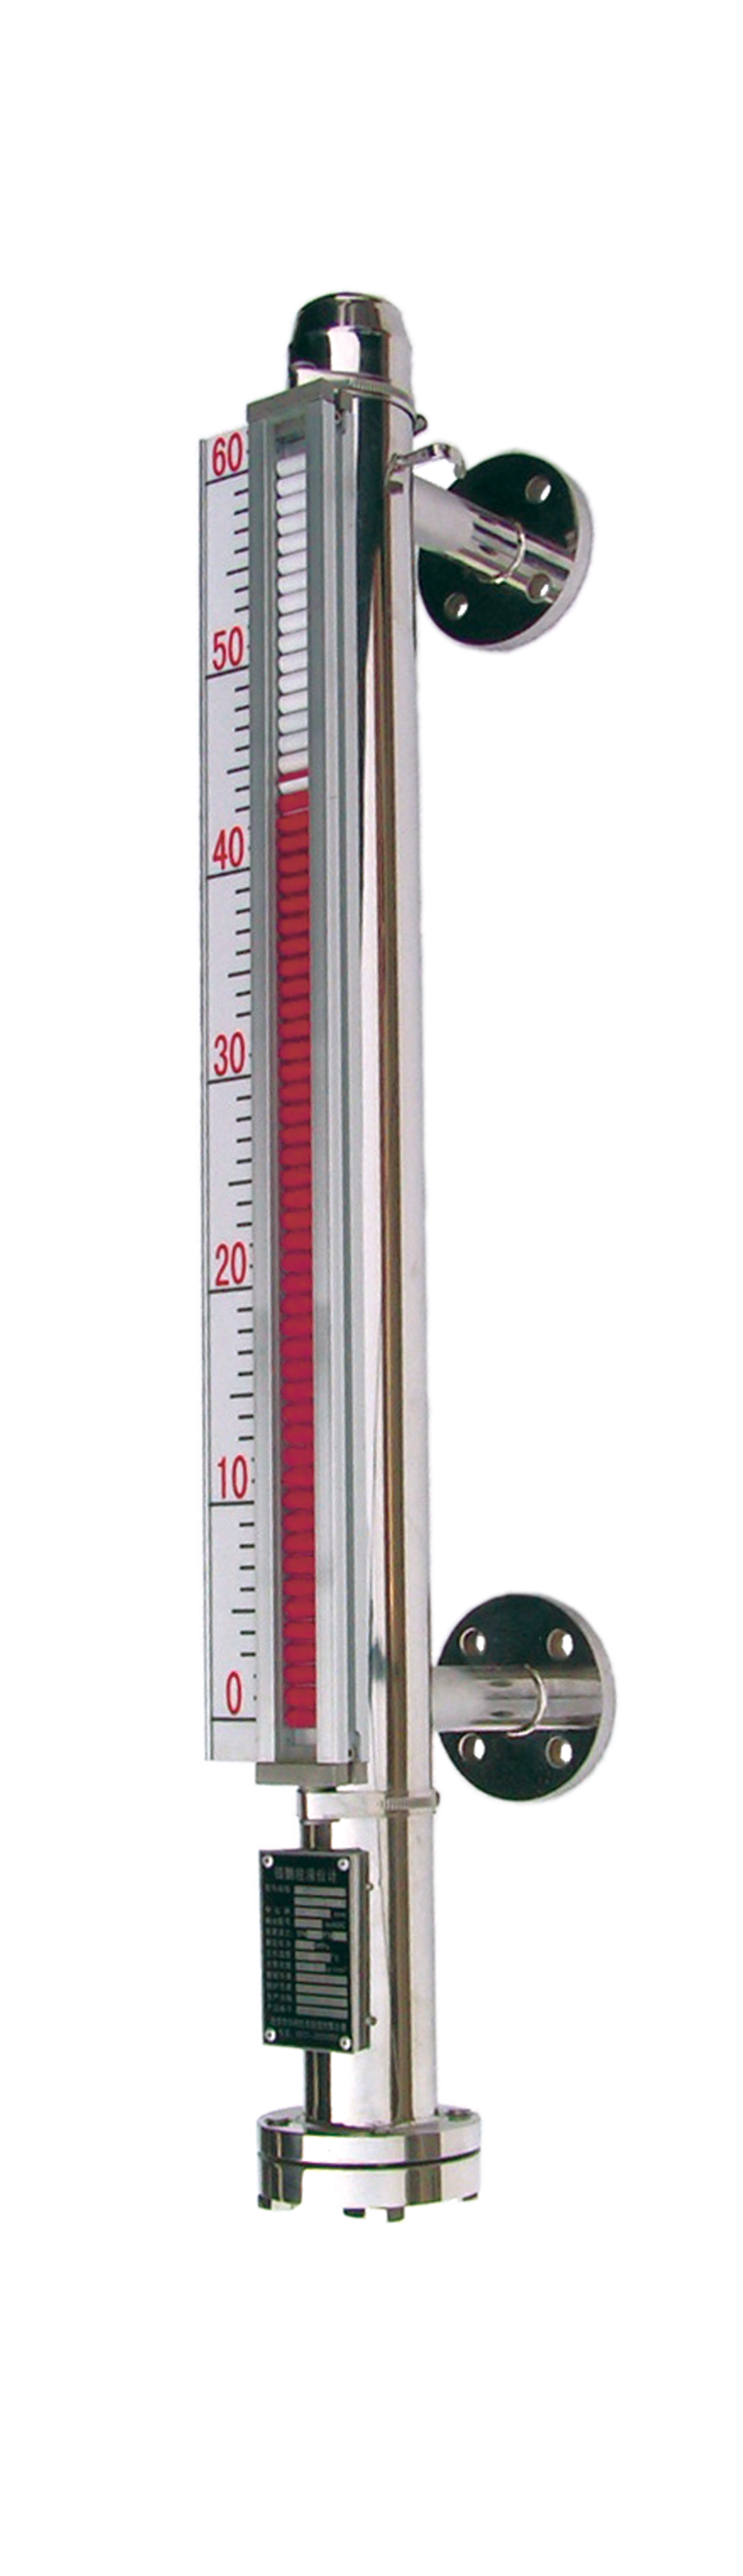 Introduction to the magnetic levitation level gauge: What kind of instrument is the magnetic levitation level gauge?